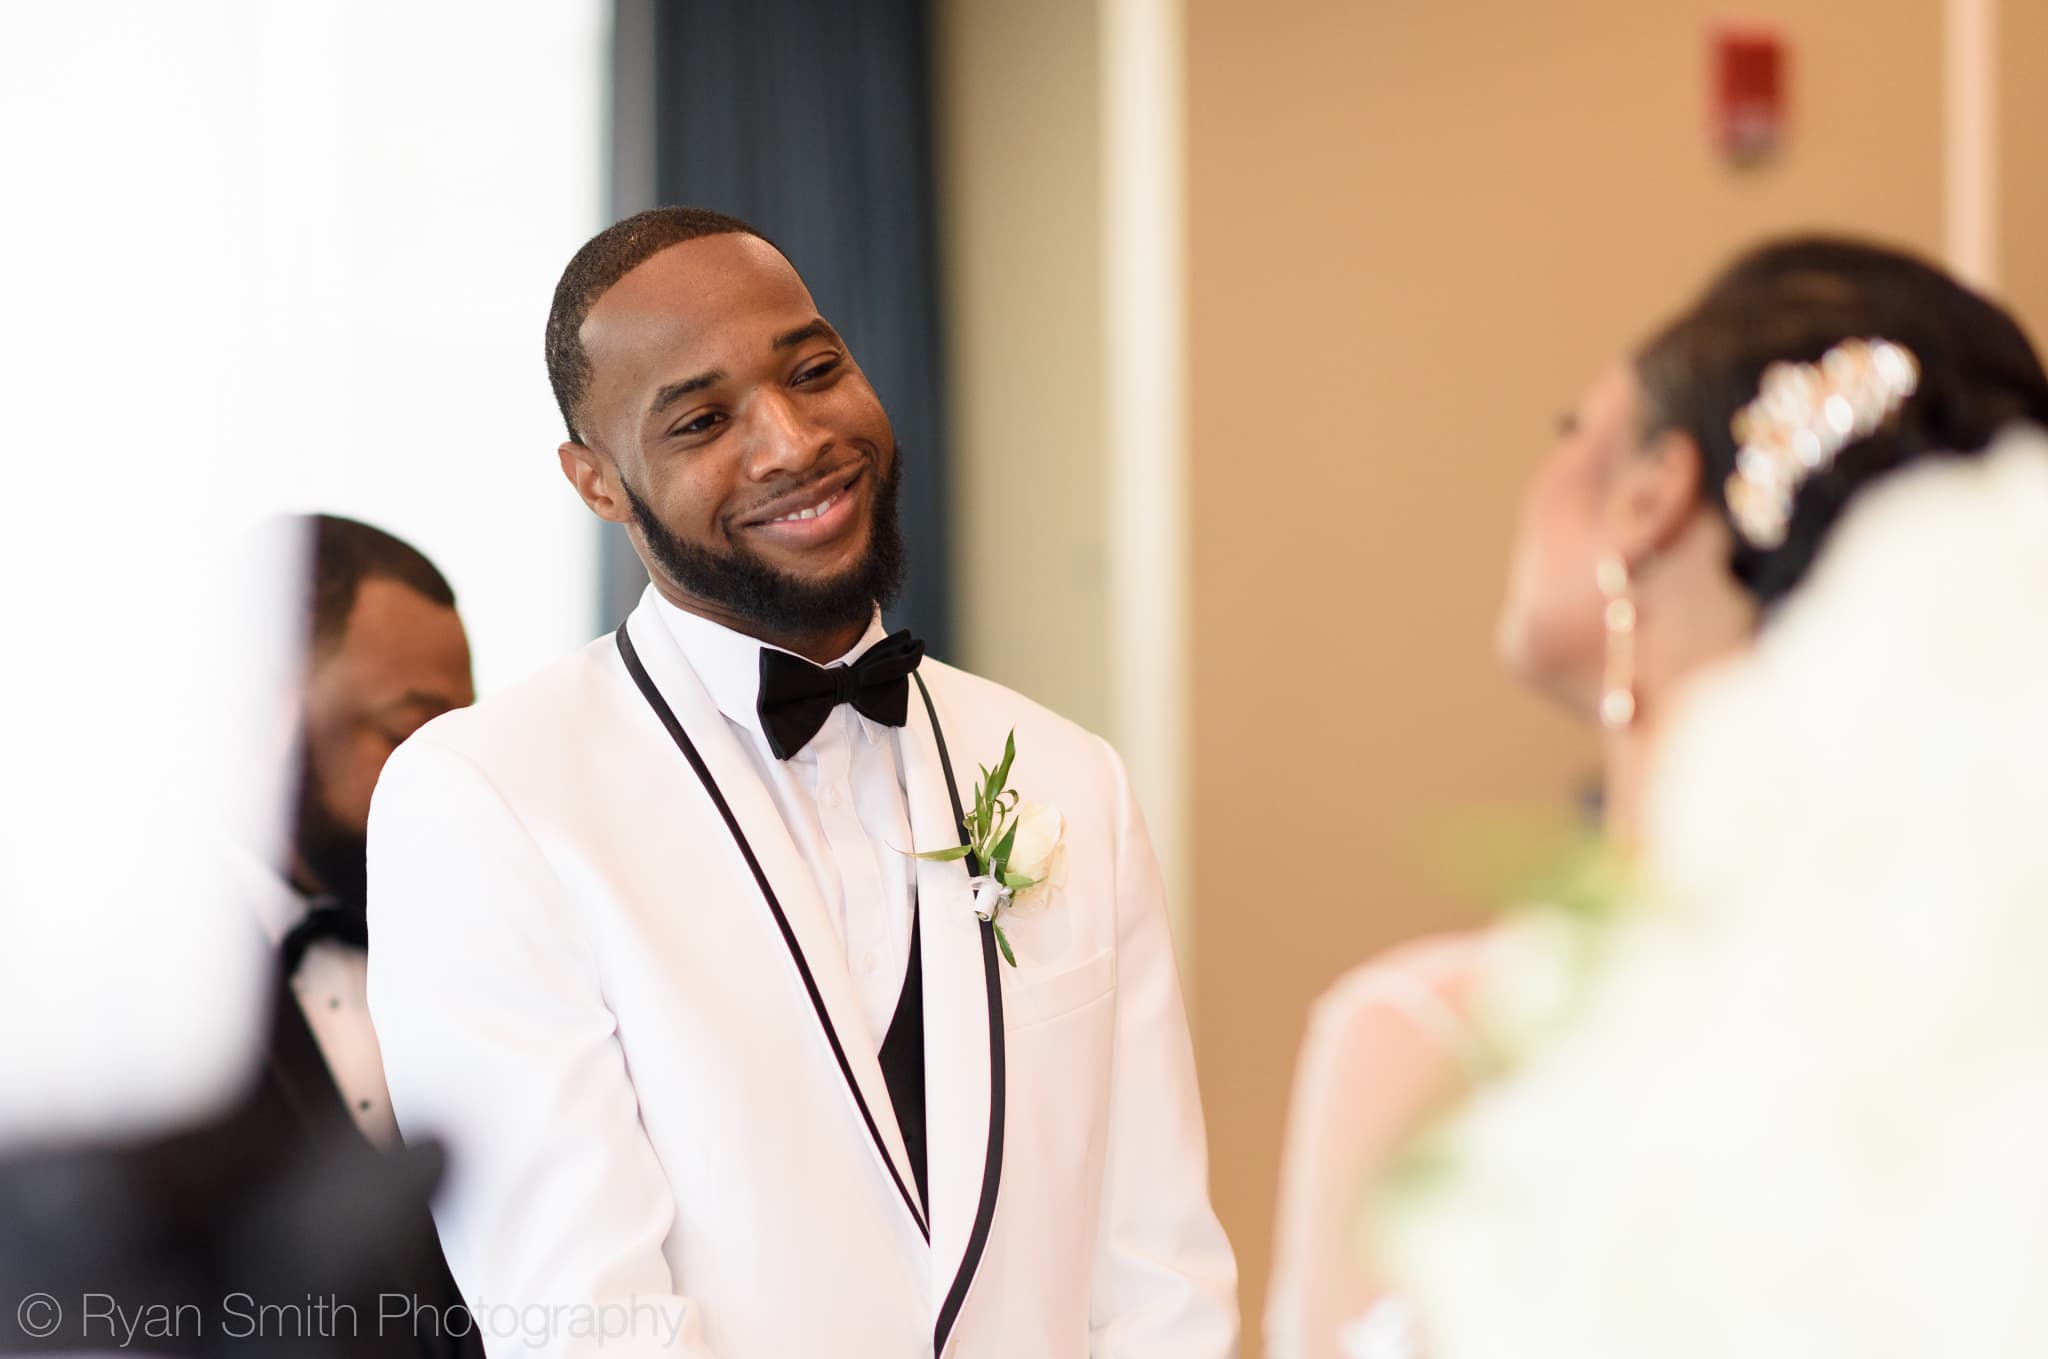 Groom smiling at bride during vows - Doubletree Resort by Hilton Myrtle Beach